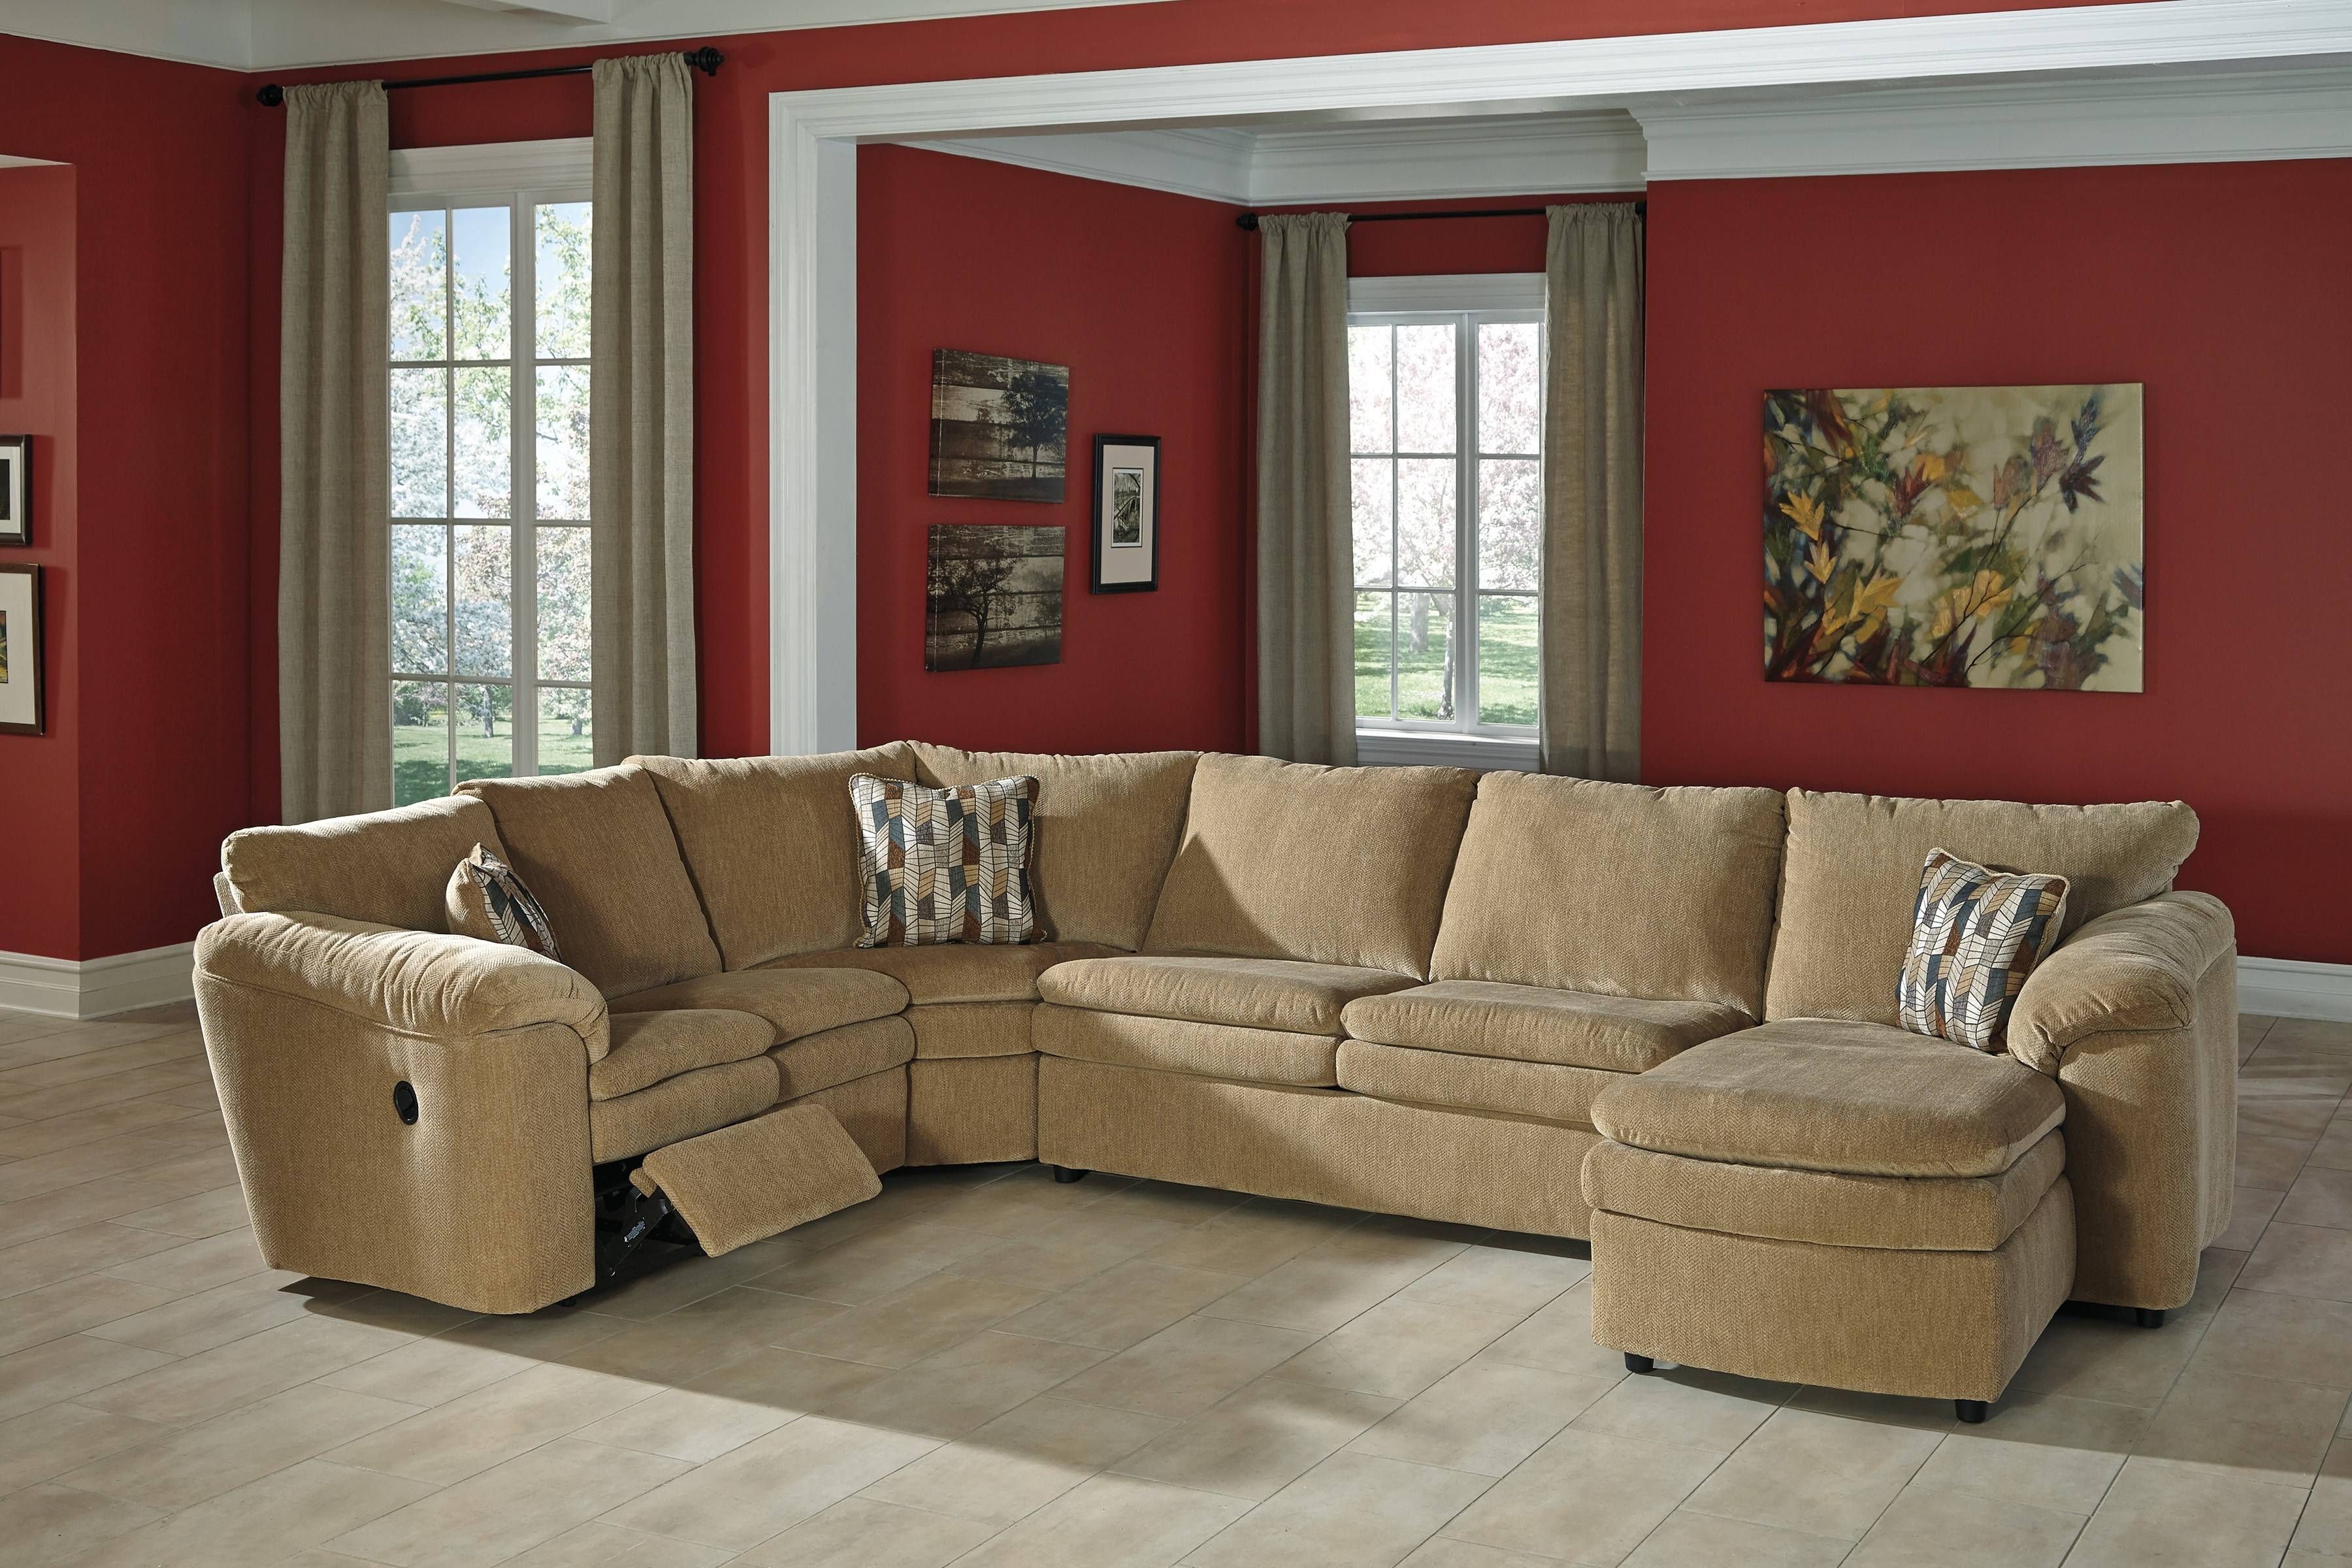 Decorating: Fill Your Living Room With Elegant Ashley Furniture With Ashley Corduroy Sectional Sofas (View 7 of 15)